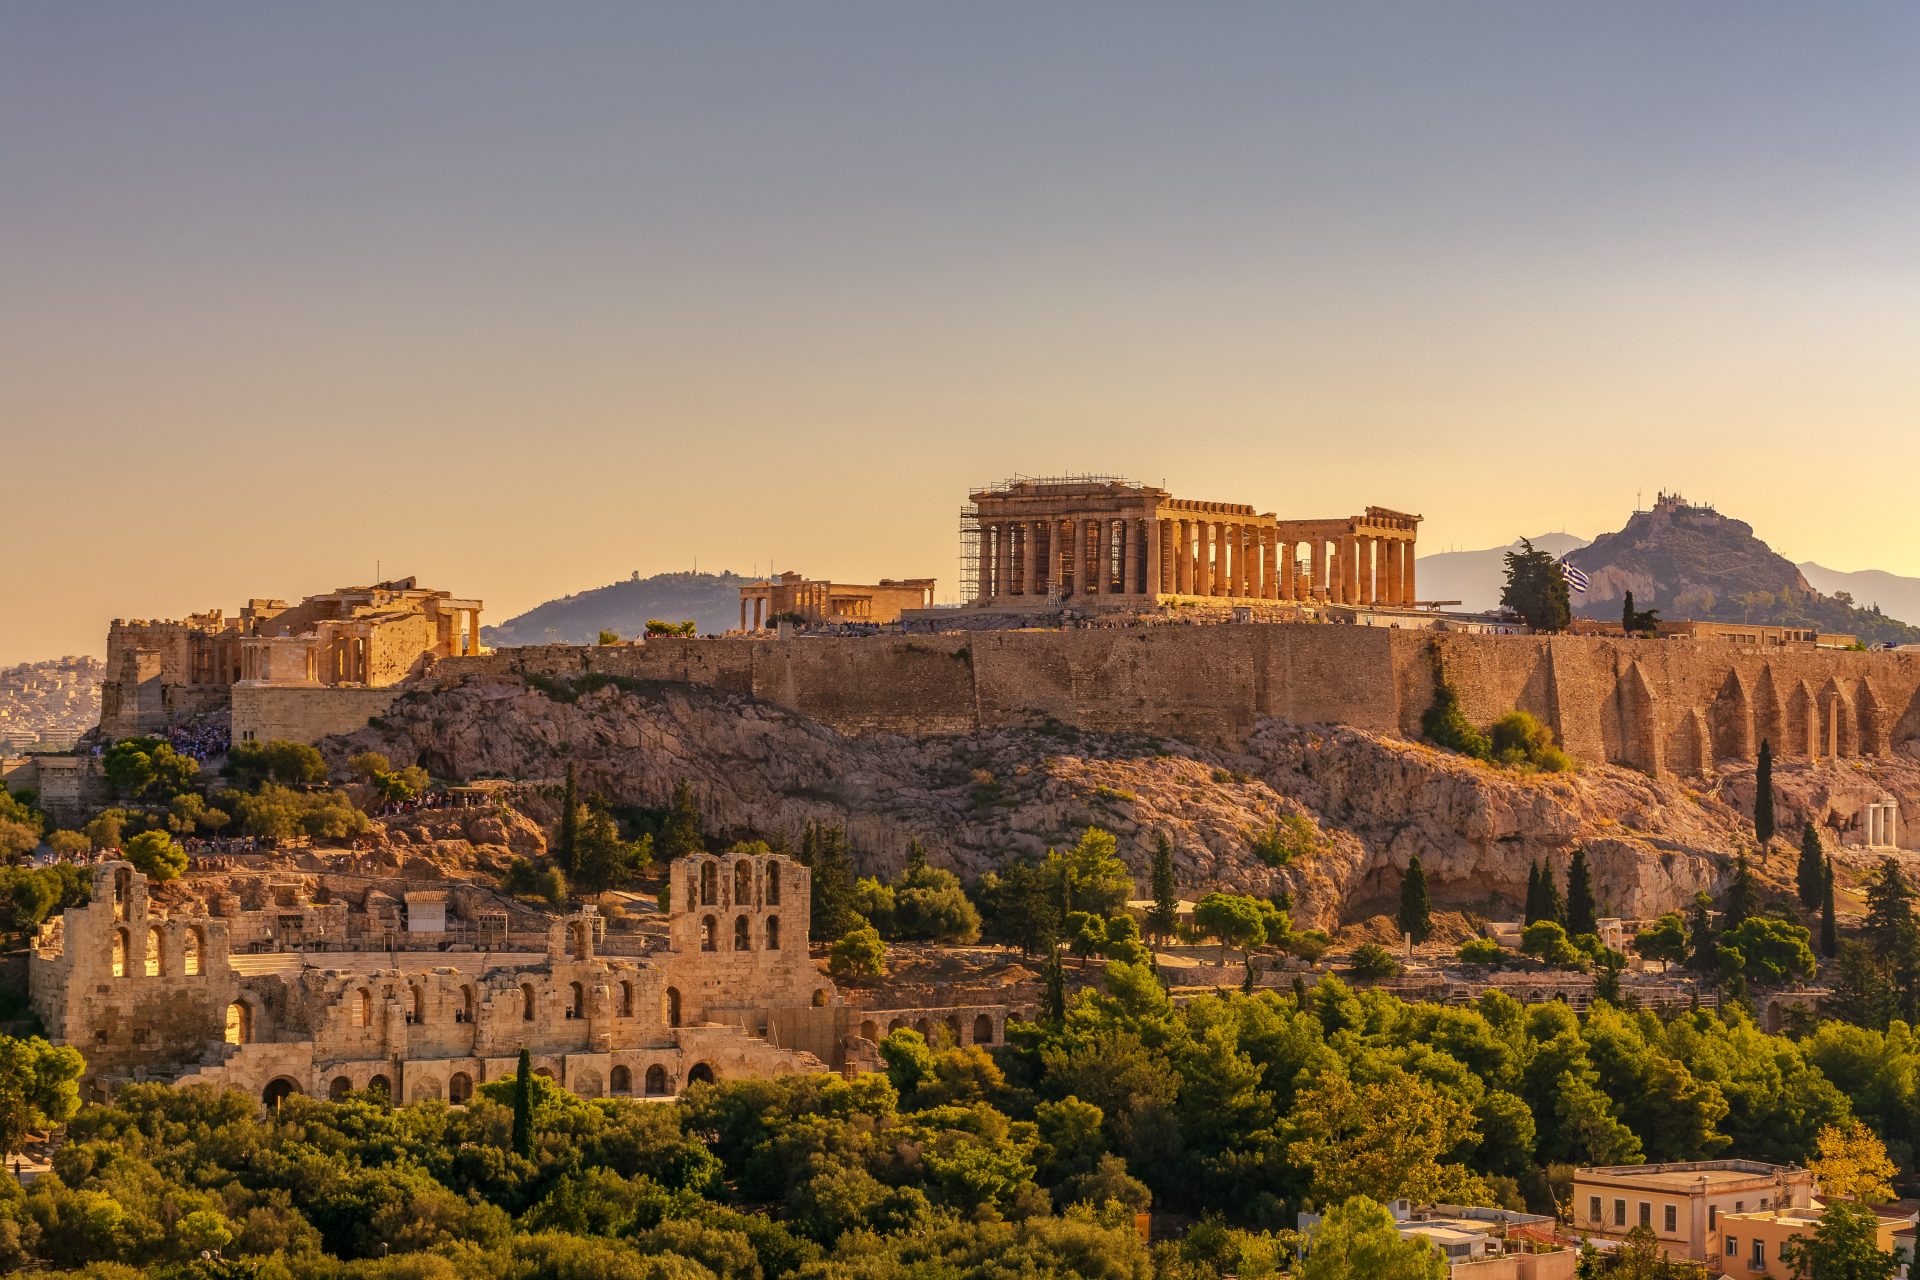 National monument of Greece - Acropolis of Athens